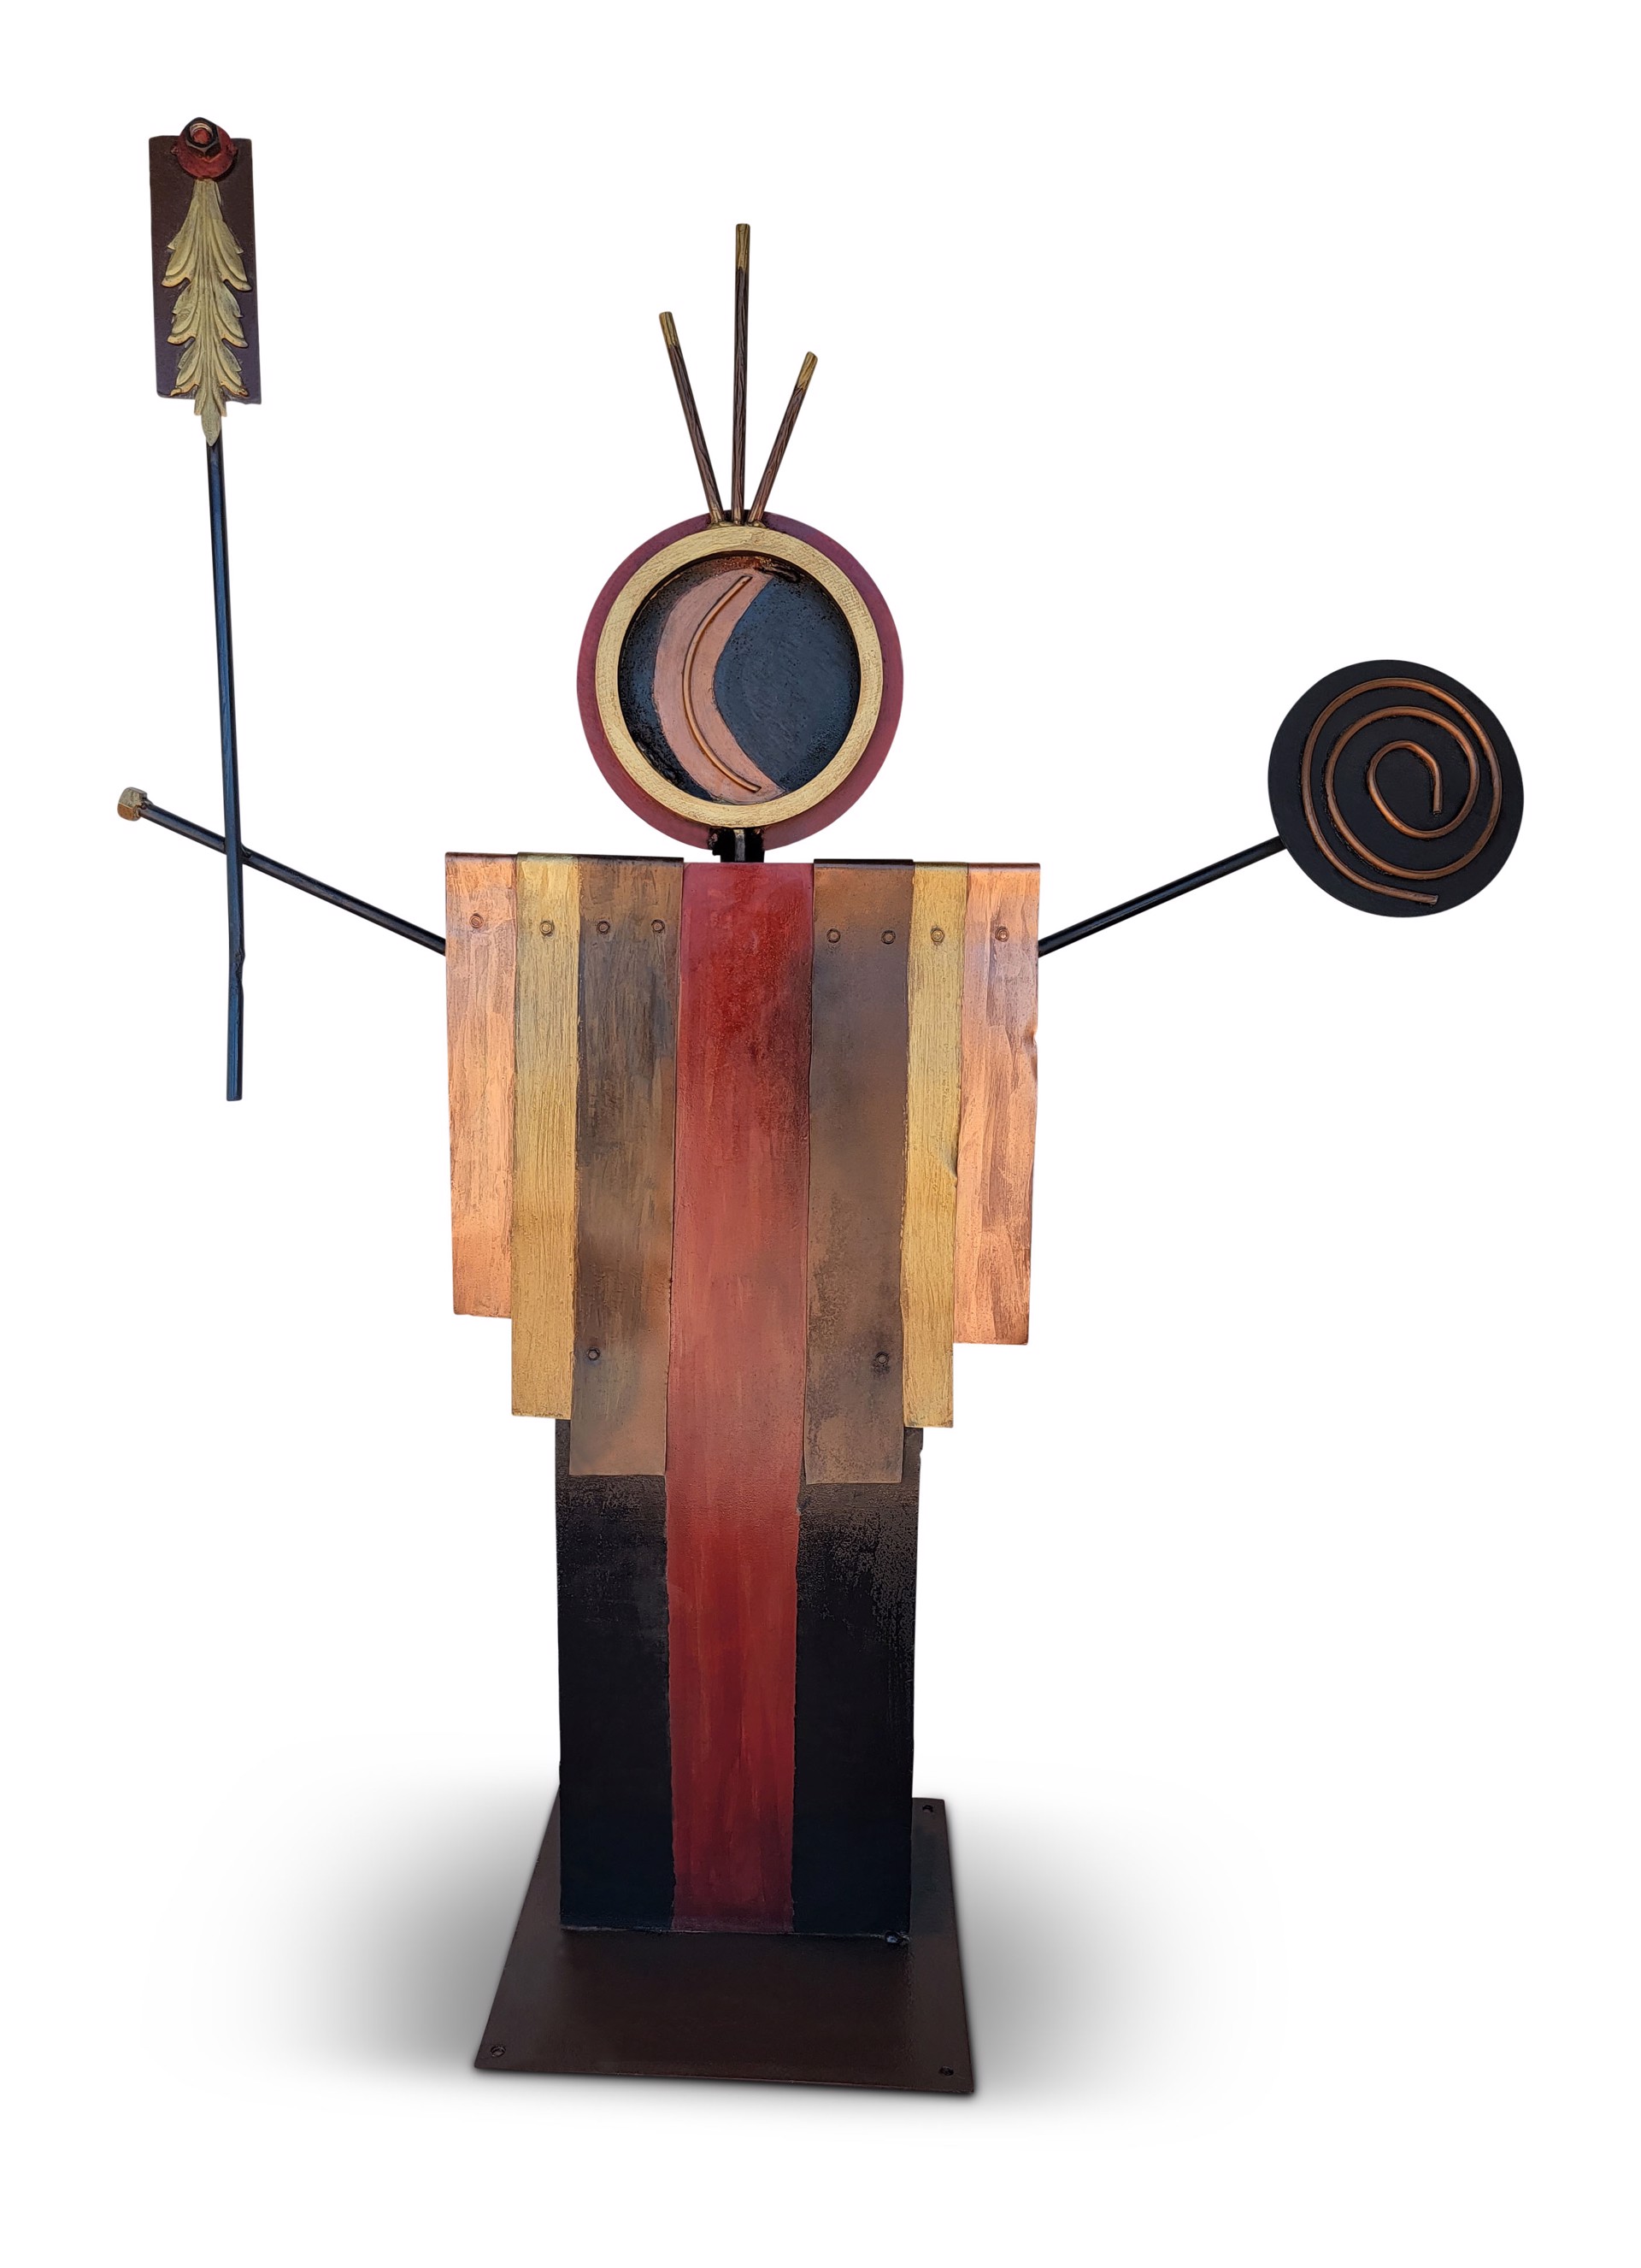 Earth Kachina ~ Red Body with Arms Outstretched by Pamela Ambrosio